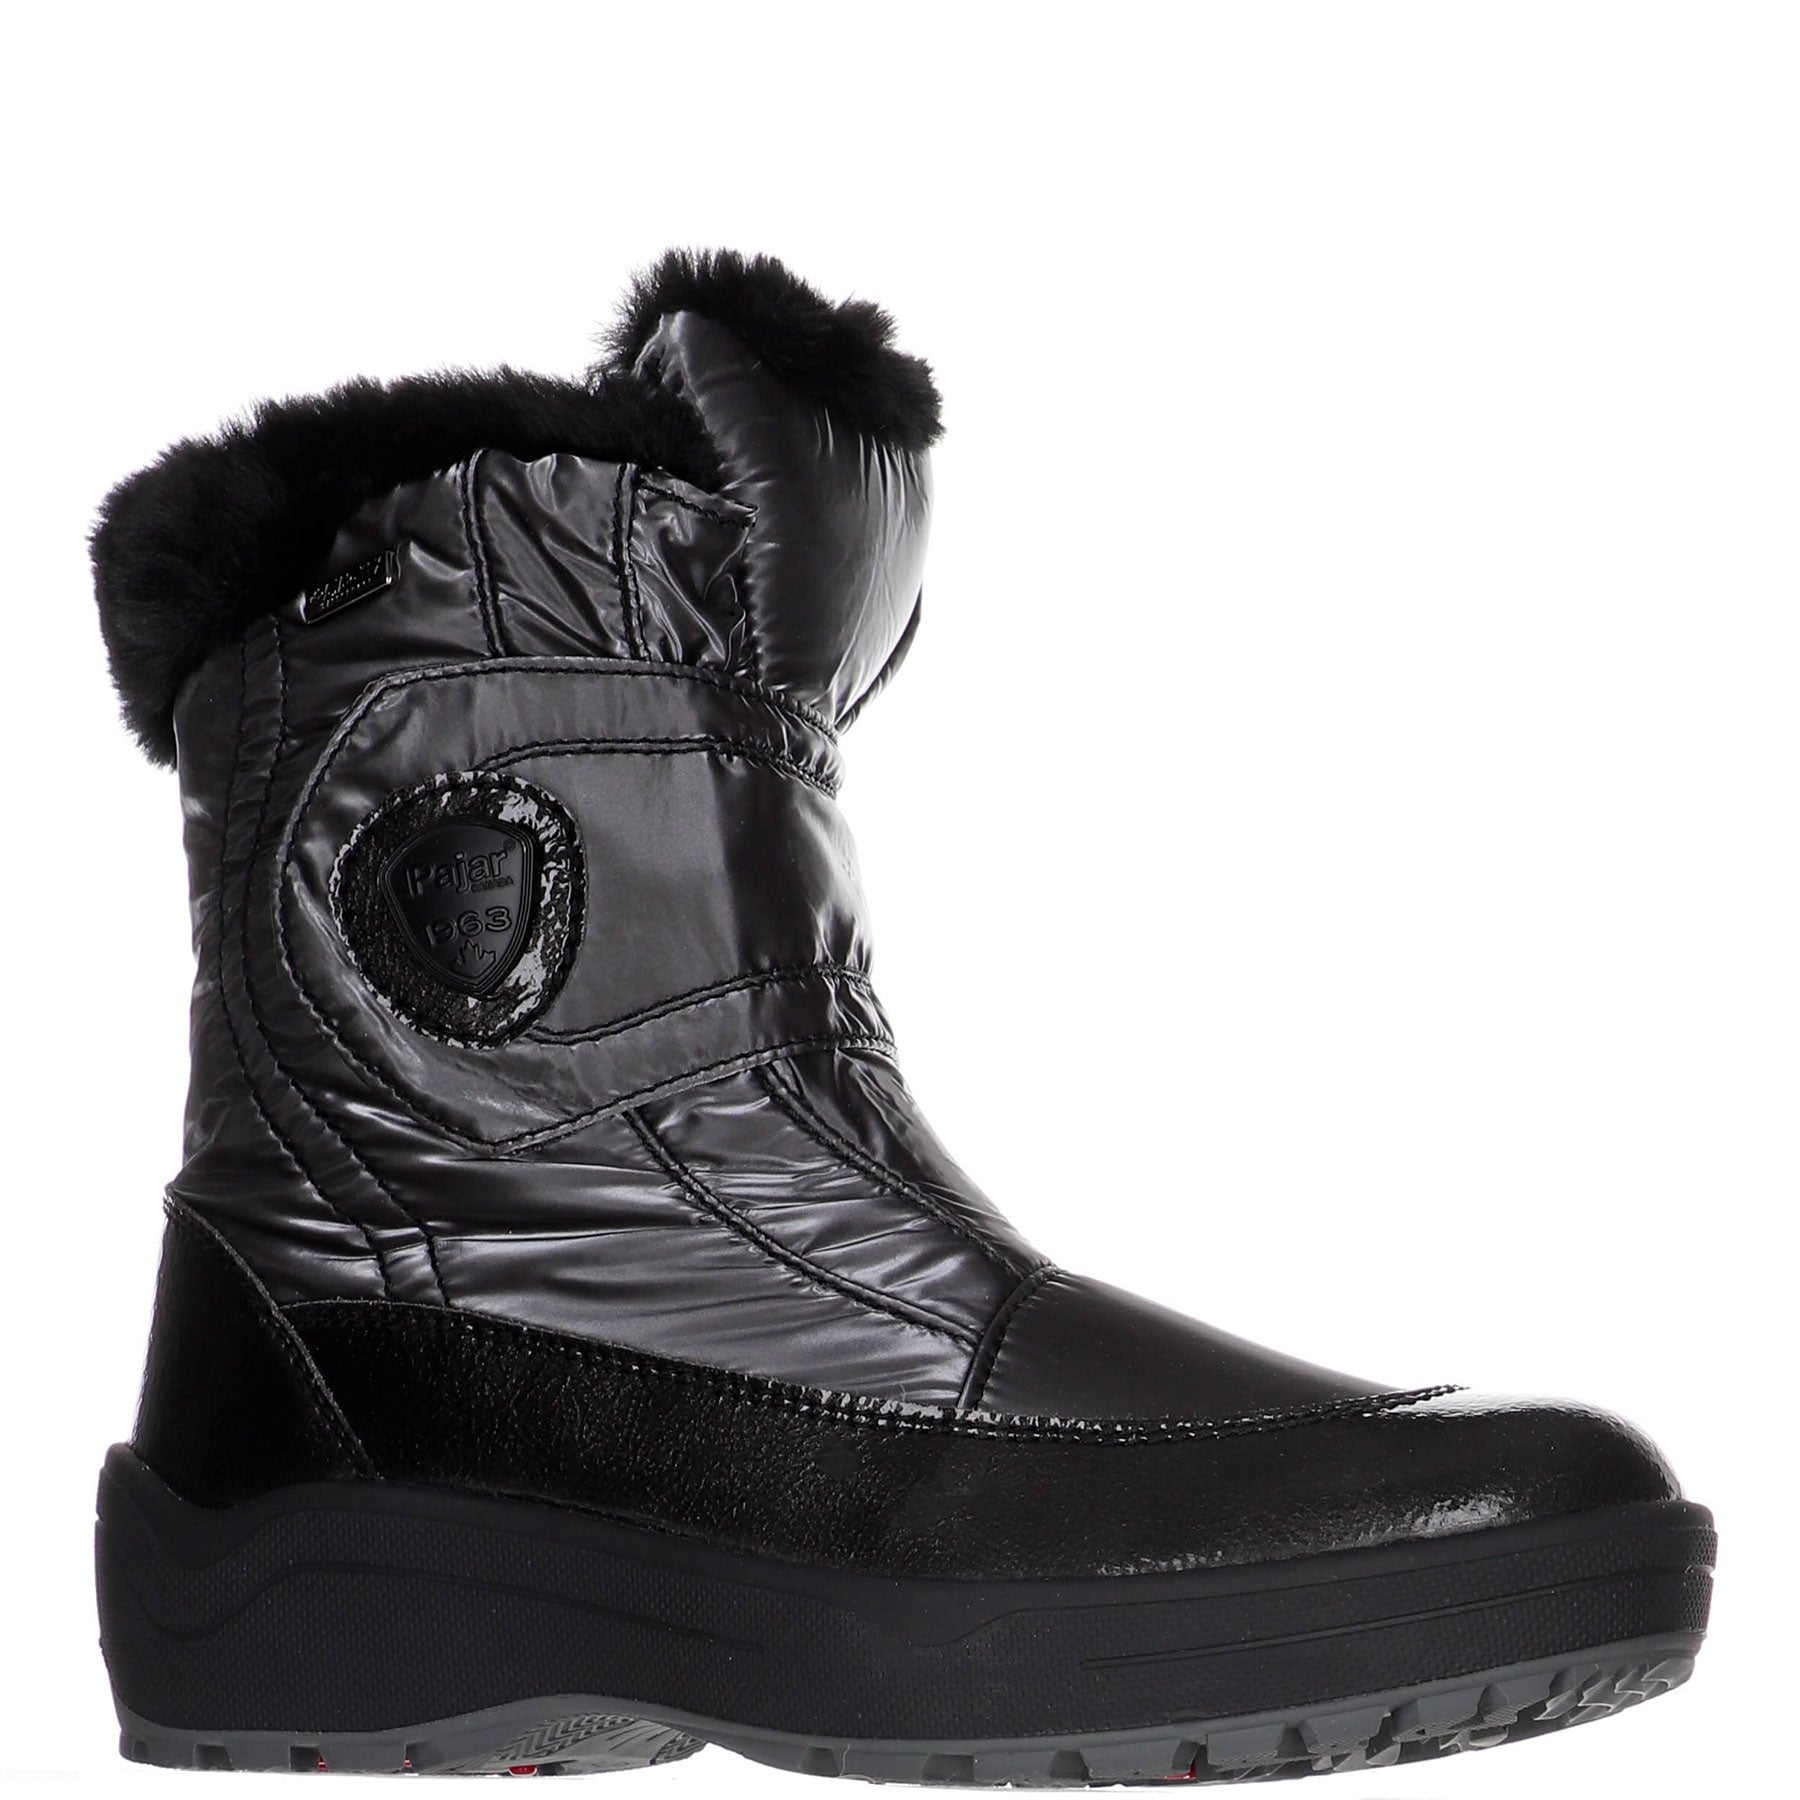 Moscou 3.0 Women's Boot w/ Ice Grippers | Pajar Canada